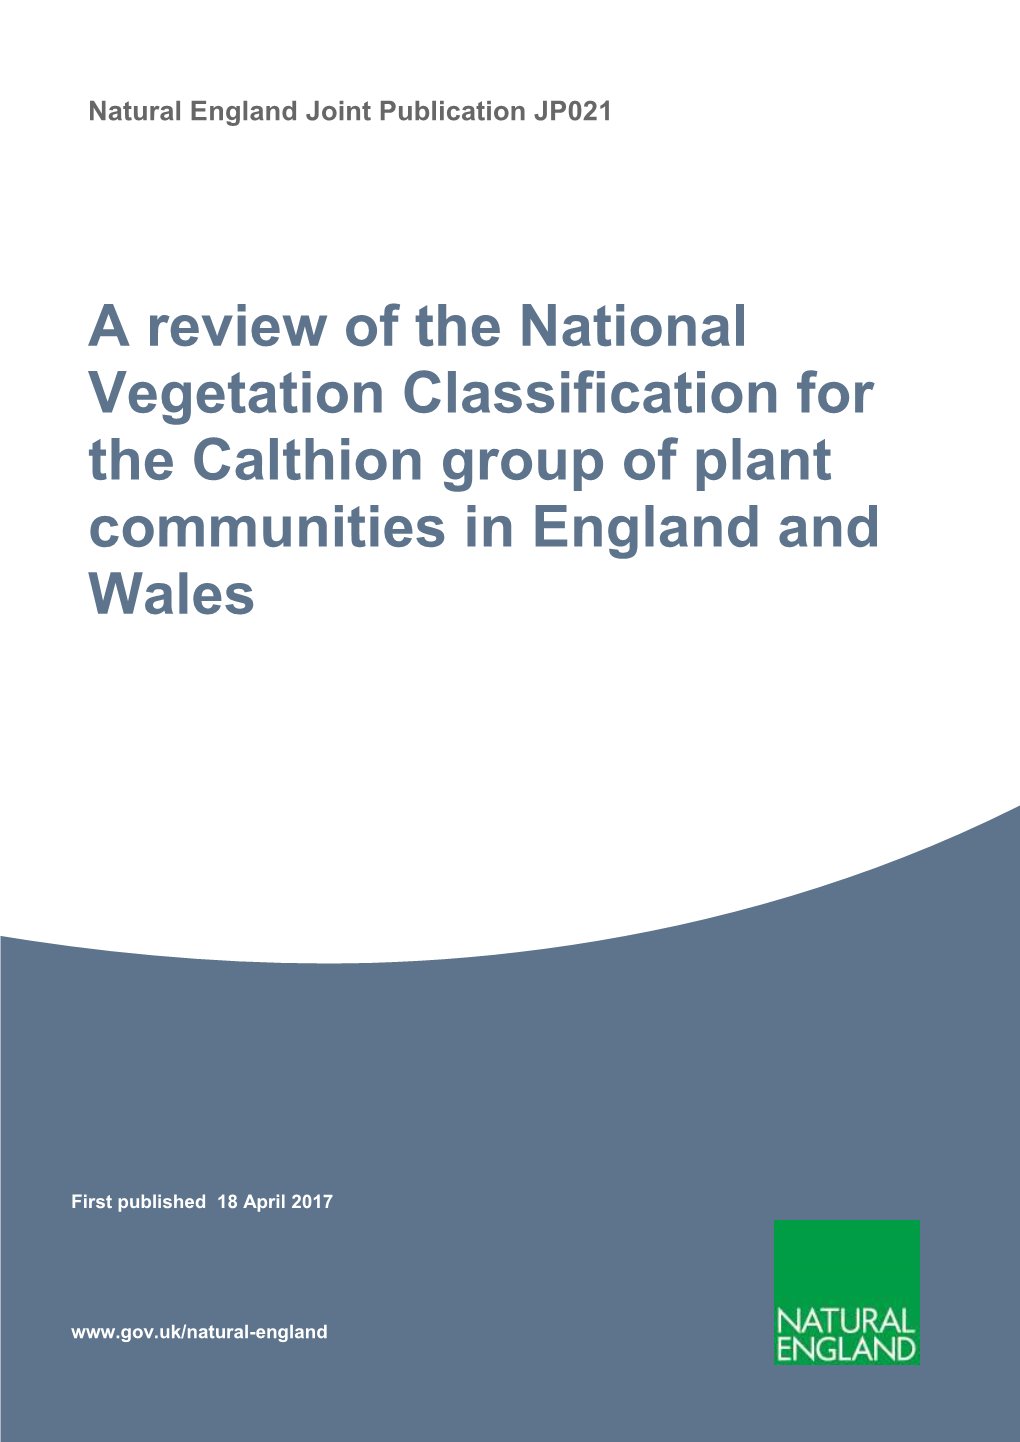 A Review of the National Vegetation Classification for the Calthion Group of Plant Communities in England and Wales